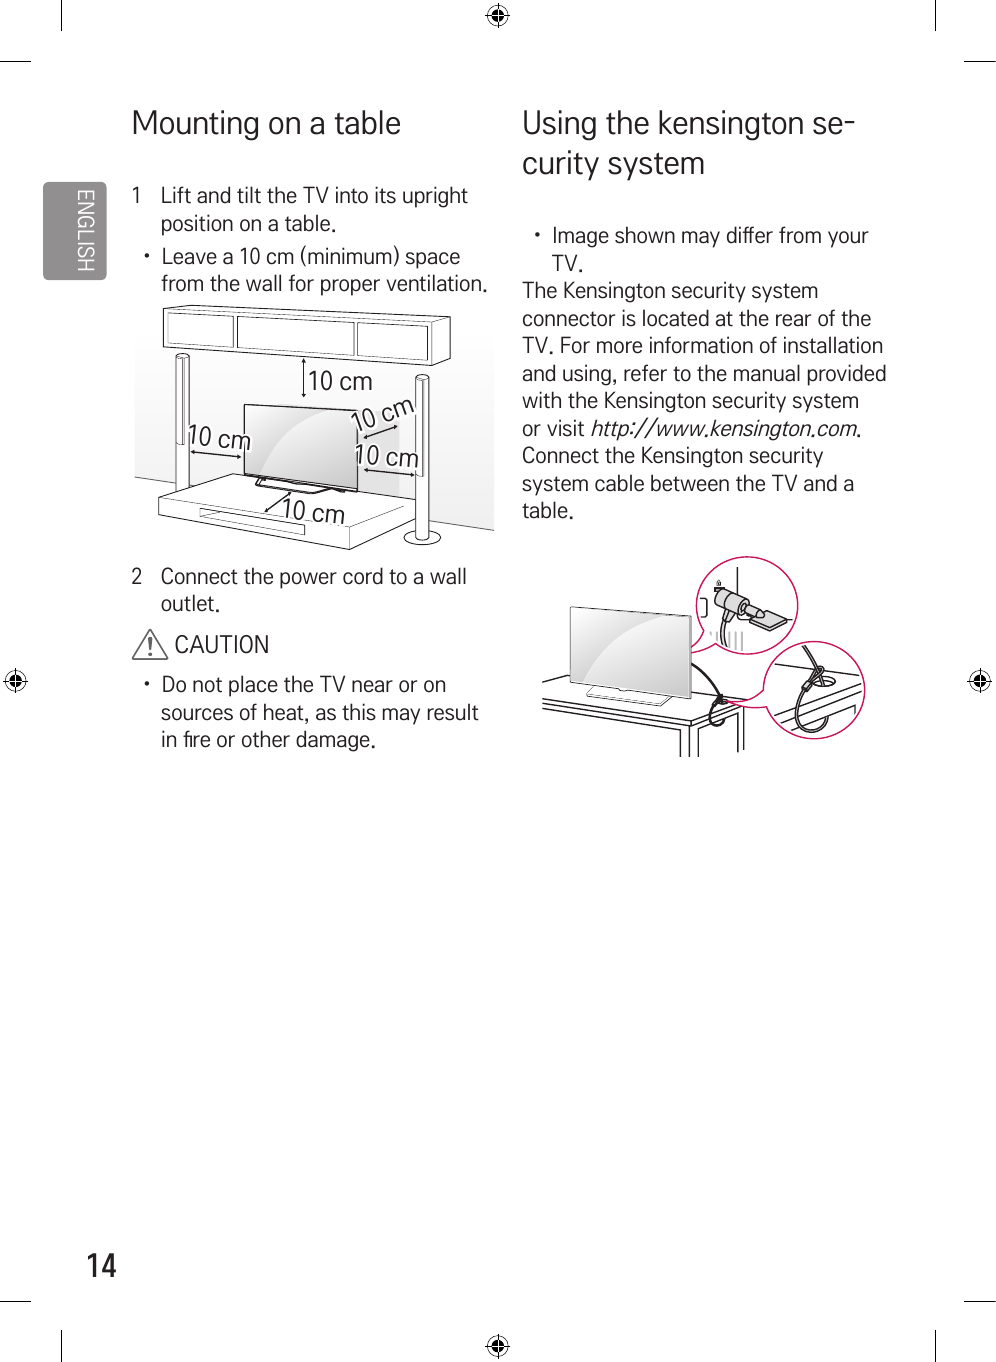 ENGLISH14Mounting on a table1  Lift and tilt the TV into its upright position on a table.  •  Leave a 10 cm (minimum) space from the wall for proper ventilation.10 cm10 cm10 cm10 cm10 cm2  Connect the power cord to a wall outlet. CAUTION•  Do not place the TV near or on sources of heat, as this may result in 󷕕re or other damage.Using the kensington se-curity system •  Image shown may di󷕔er from your TV.The Kensington security system connector is located at the rear of the TV. For more information of installation and using, refer to the manual provided with the Kensington security system or visit http://www.kensington.com. Connect the Kensington security system cable between the TV and a table.